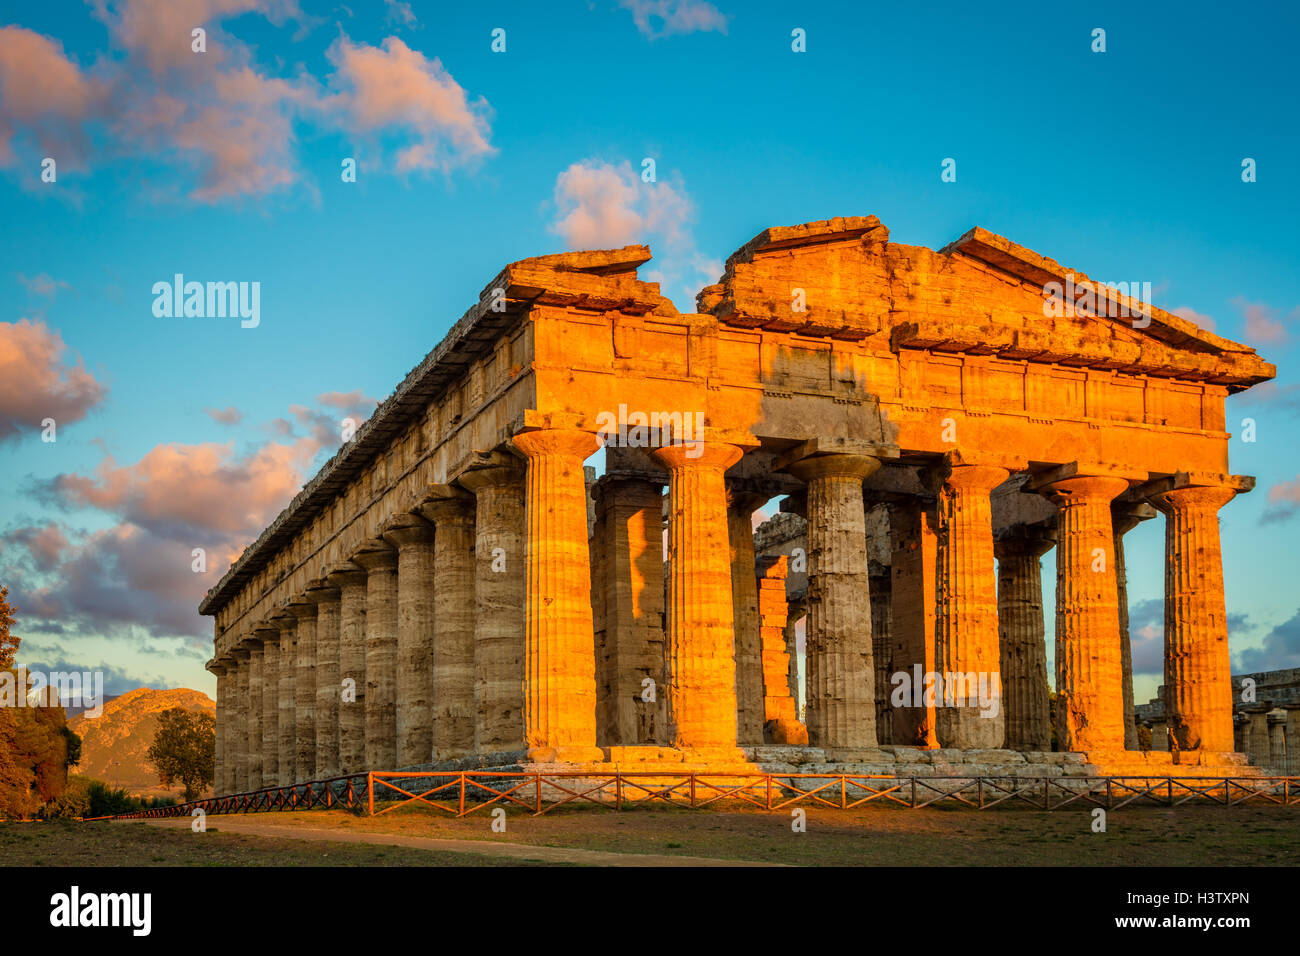 Paestum was a major ancient Greek city on the coast of the Tyrrhenian Sea in Magna Graecia (southern Italy). Stock Photo